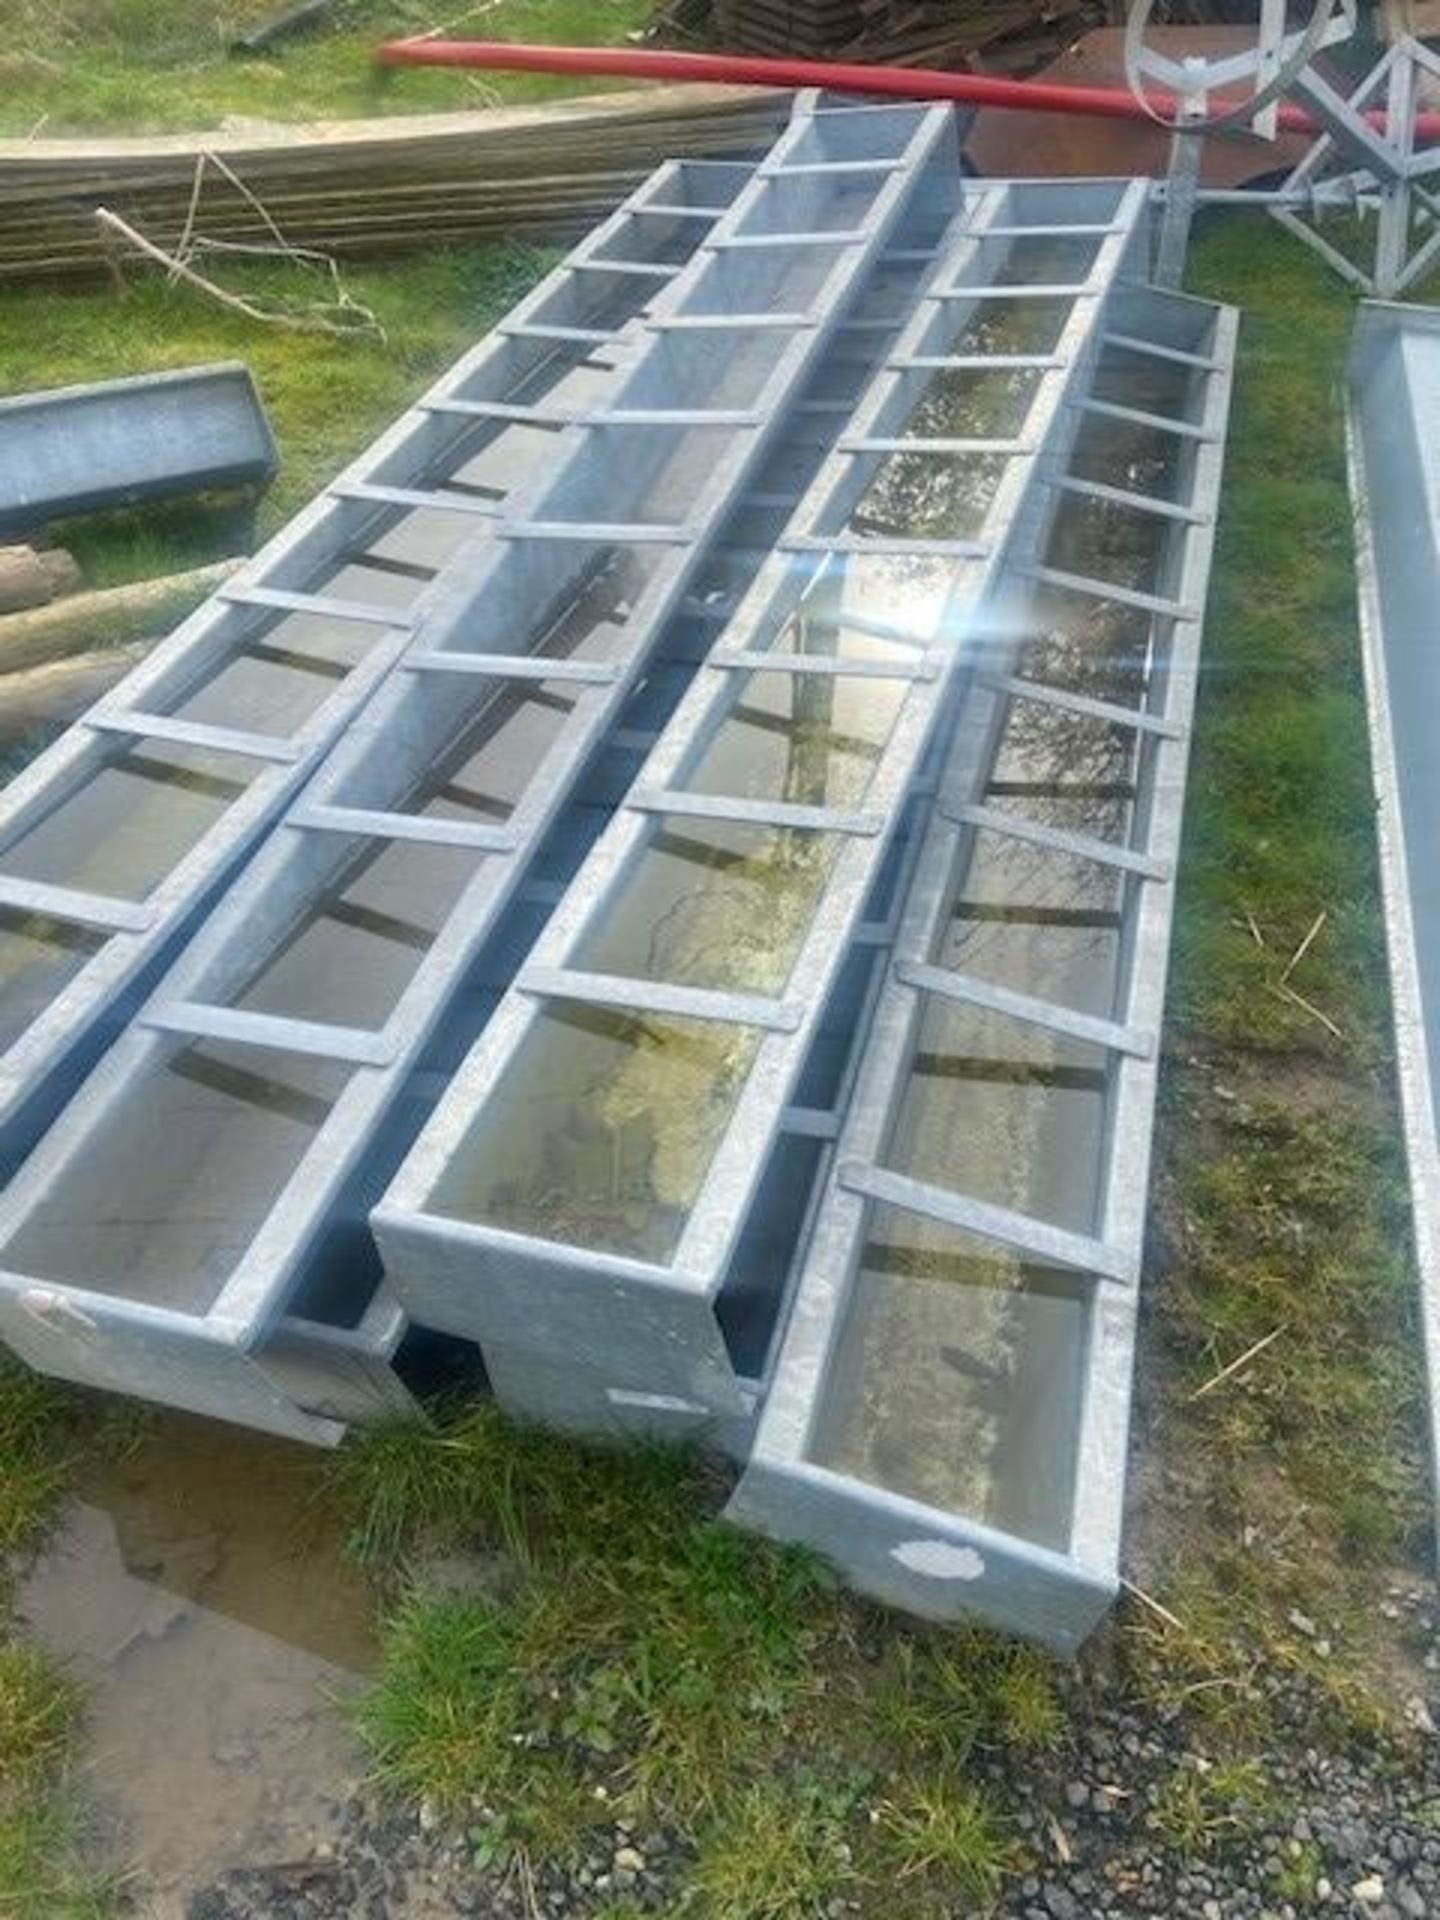 4 FEED TROUGHS, 9FT AS NEW